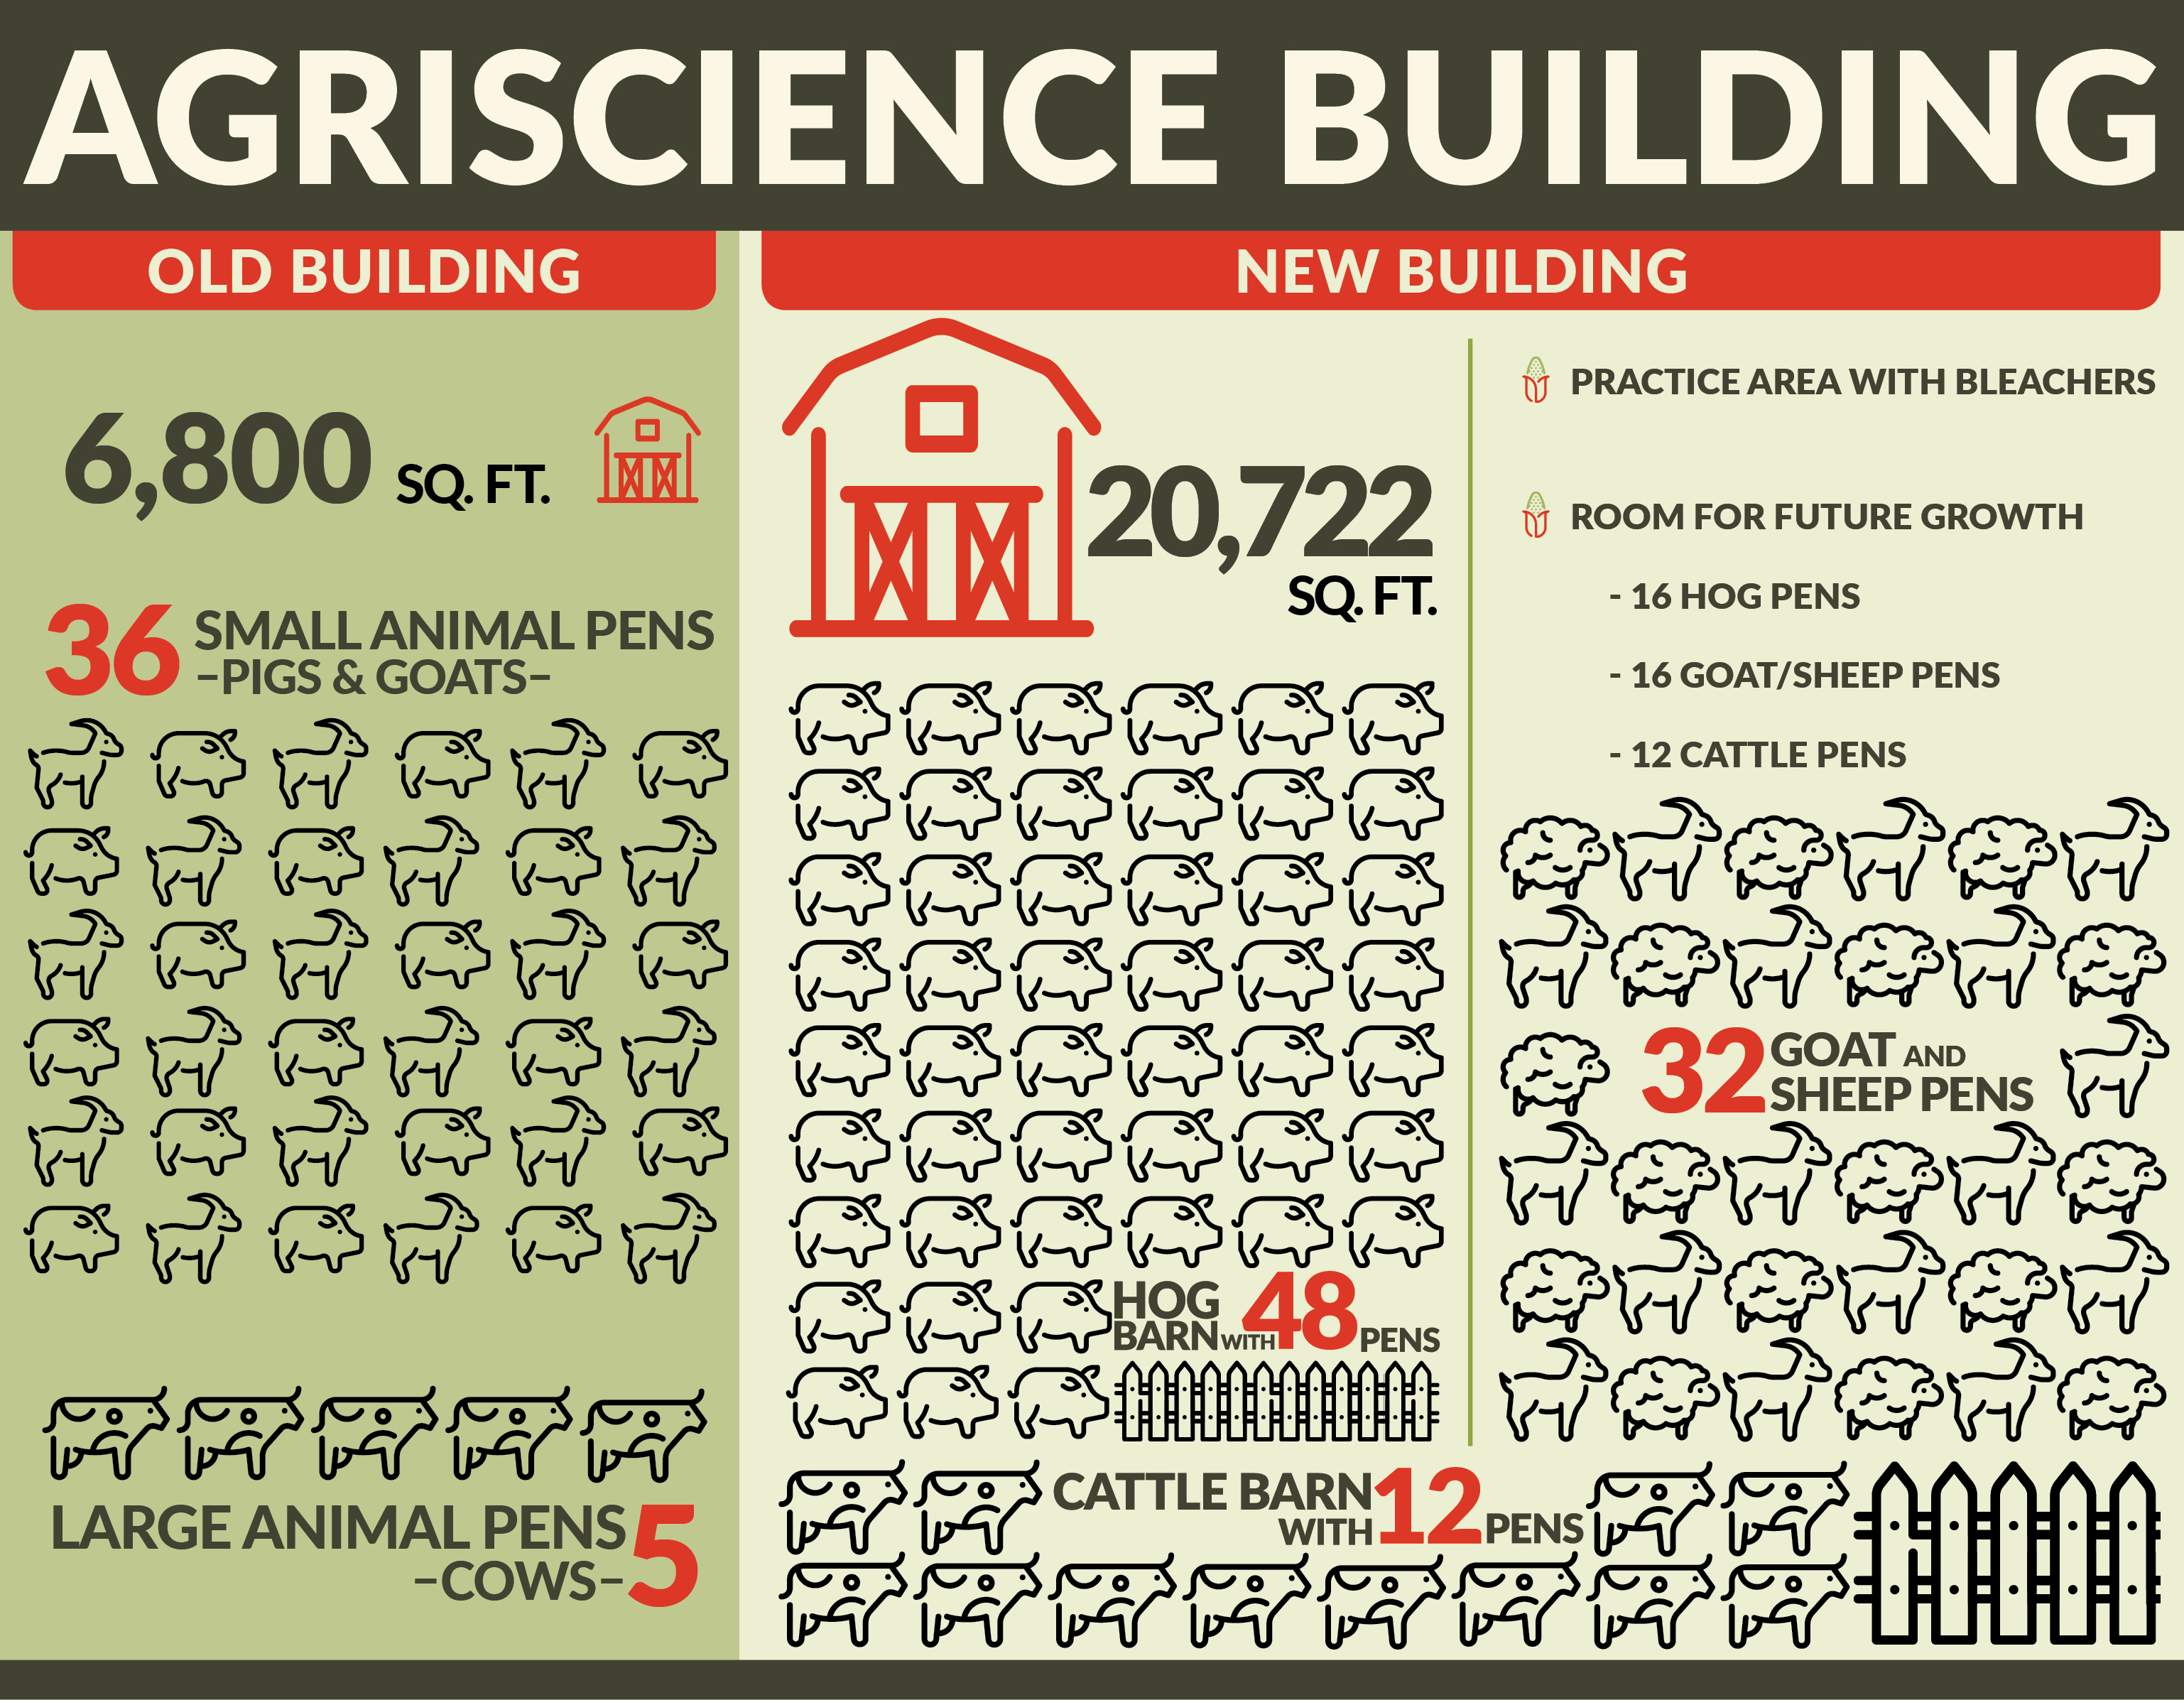 Ag Science Graphic showing changes to building